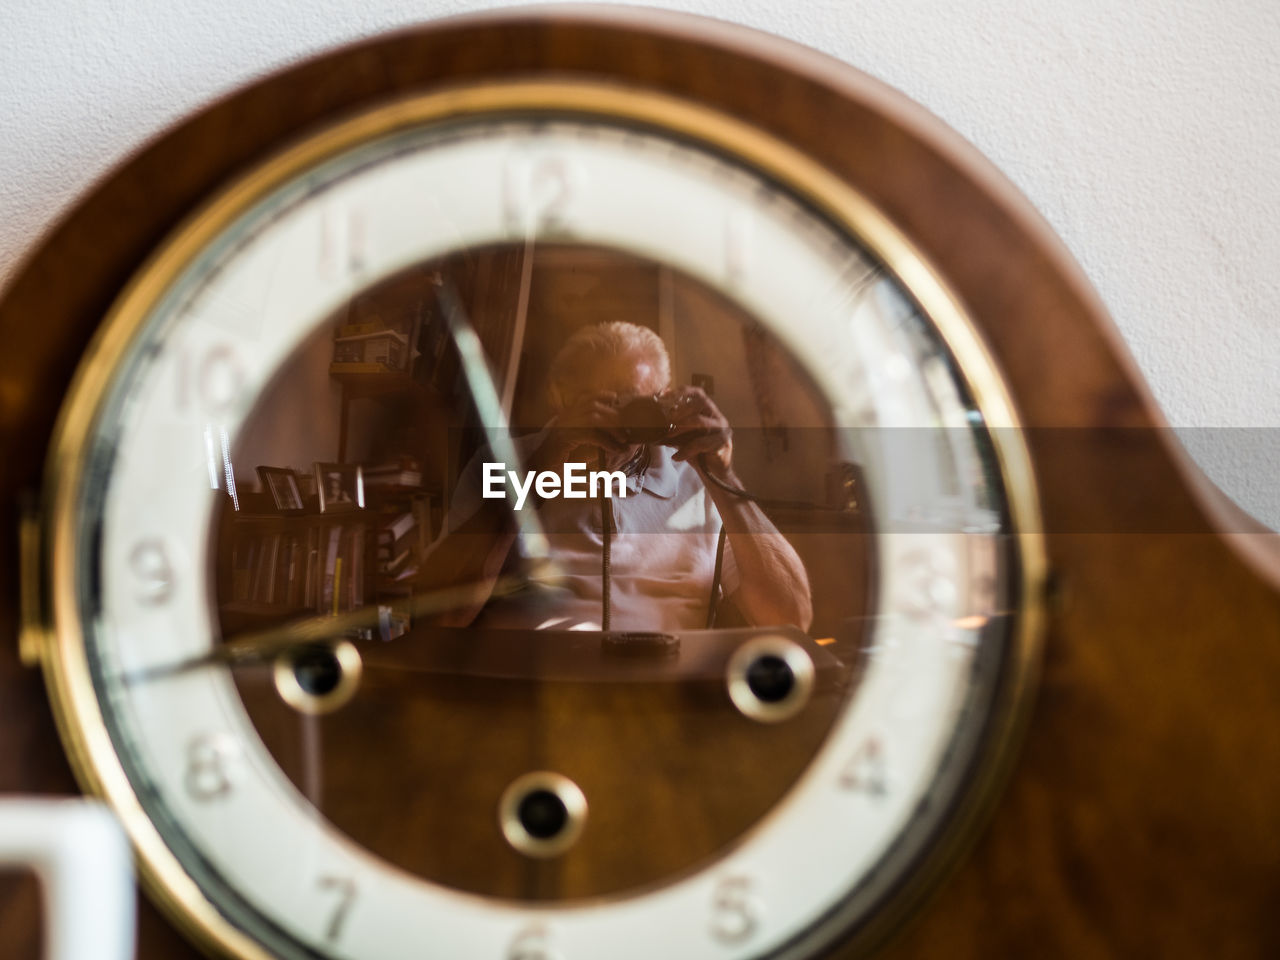 Senior man photographing with camera seen in clock at home